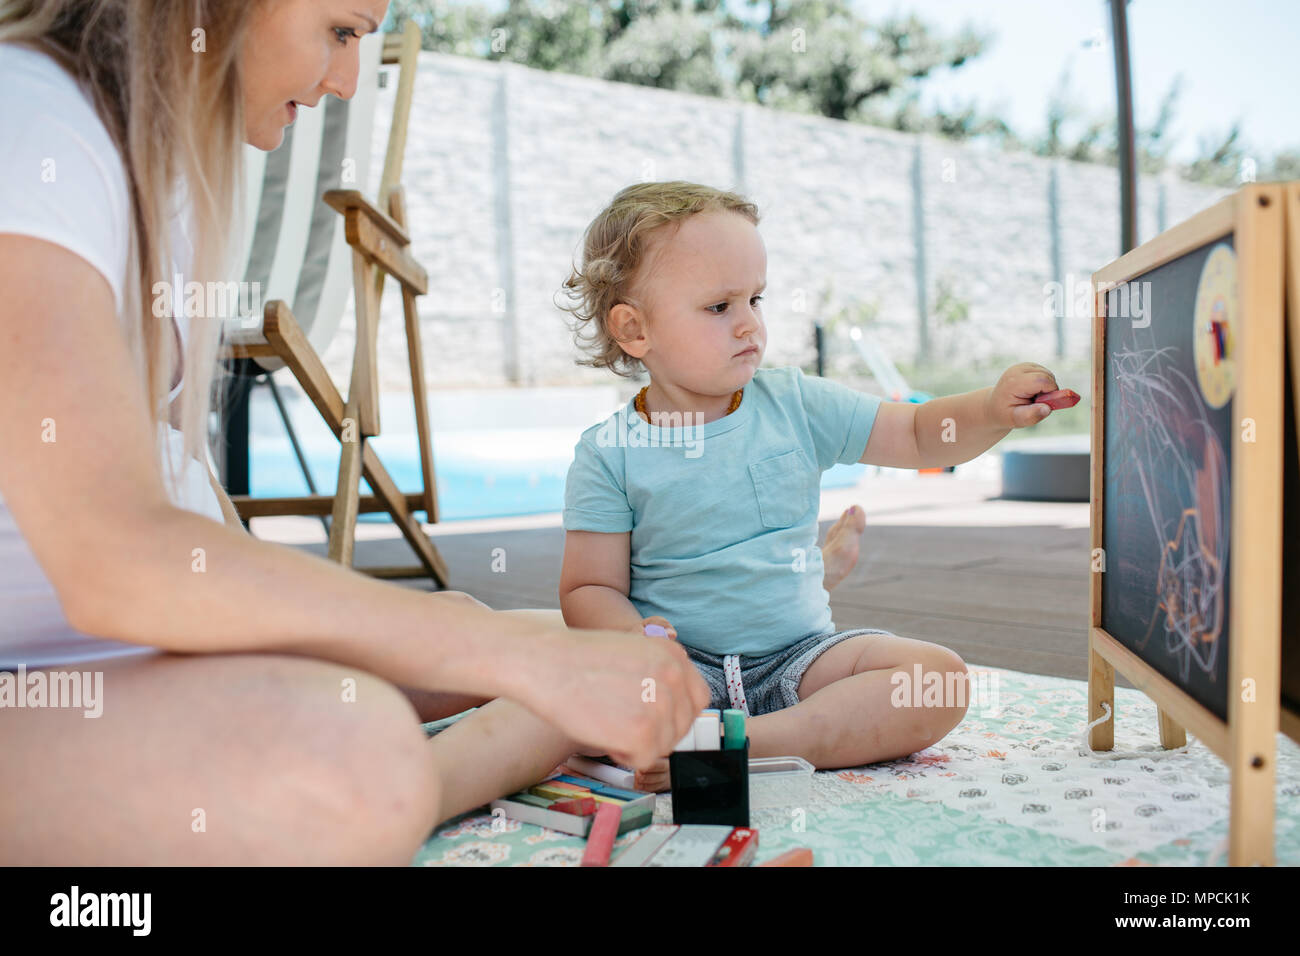 A little boy and his mother sitting on a patio and drawing on a chalkboard. A mother admiring first drawings of her son on a chalkboard. Stock Photo